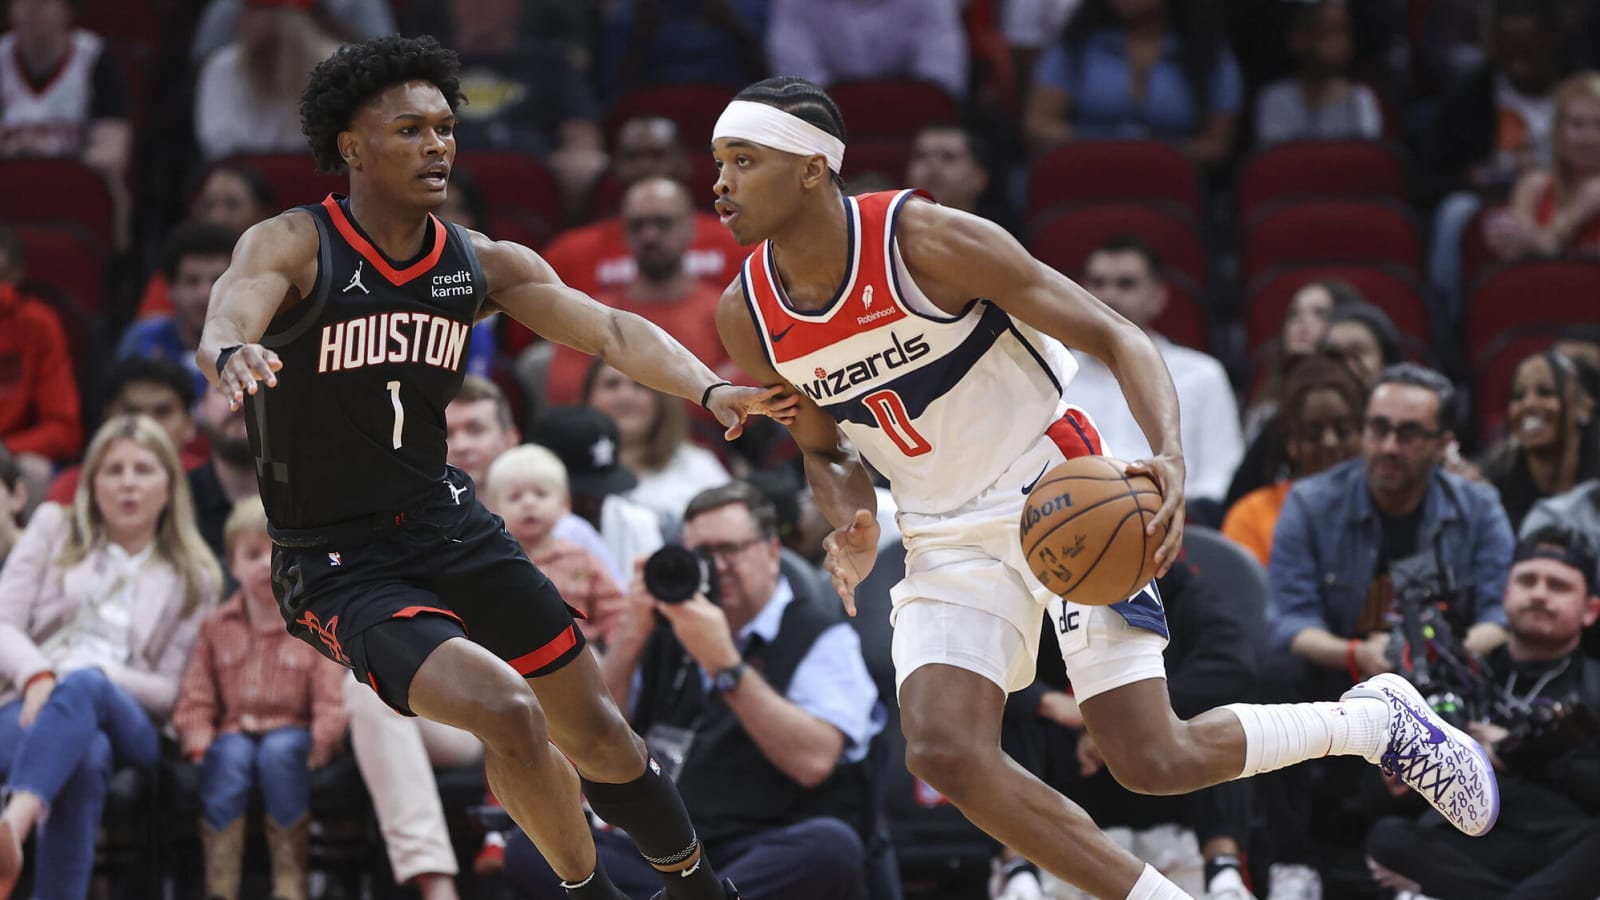 Washington Wizards: Bilal Coulibaly Calls 2-Time NBA All-Star Forward the ‘Easiest Superstar to Guard’ in Wild Claim